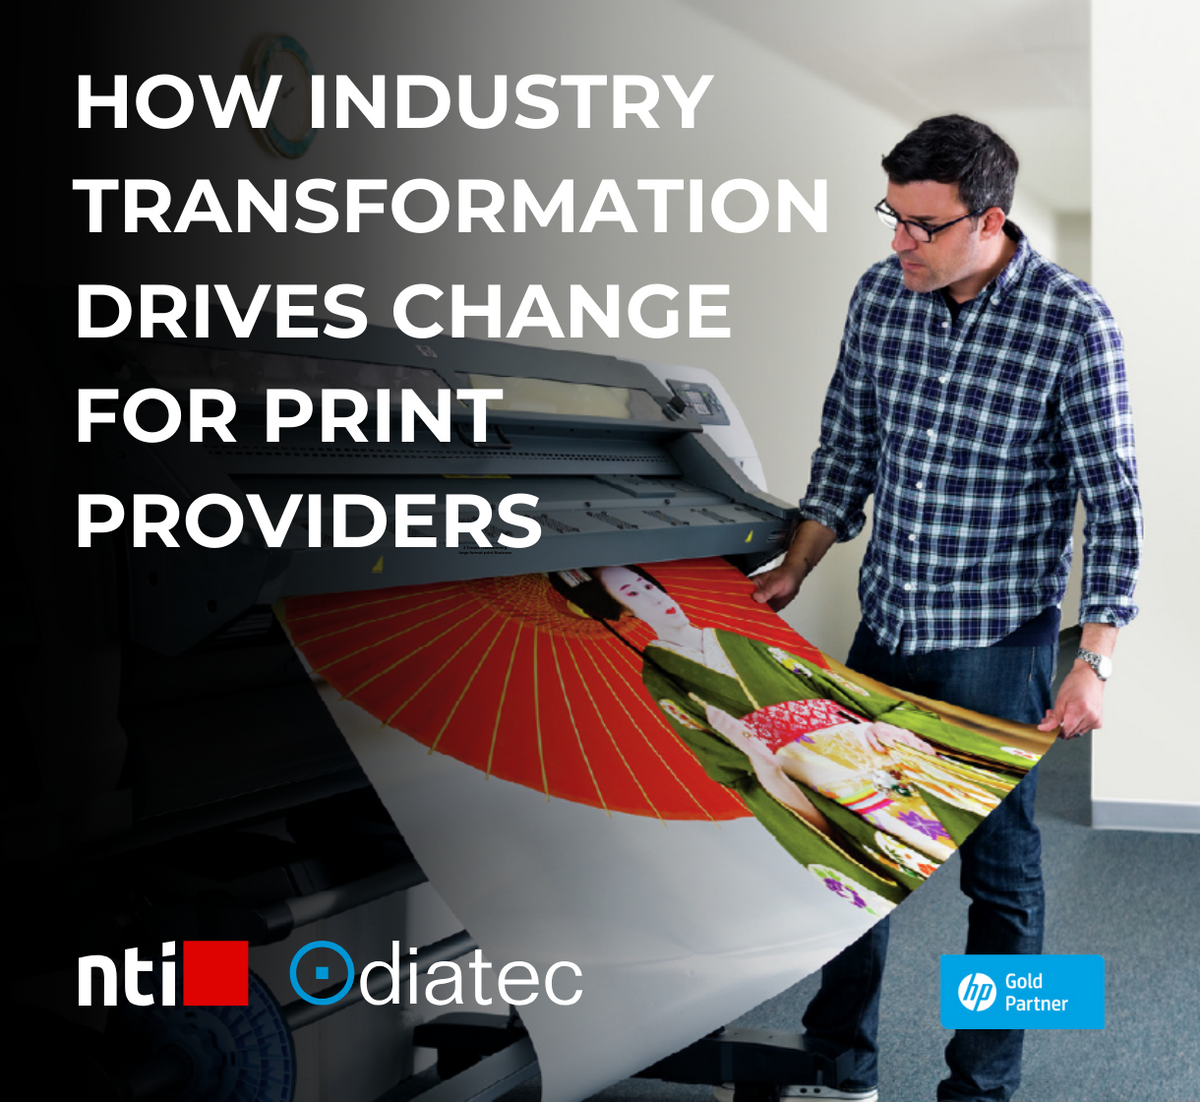 How Industry Transformation Drives Change for Print Providers